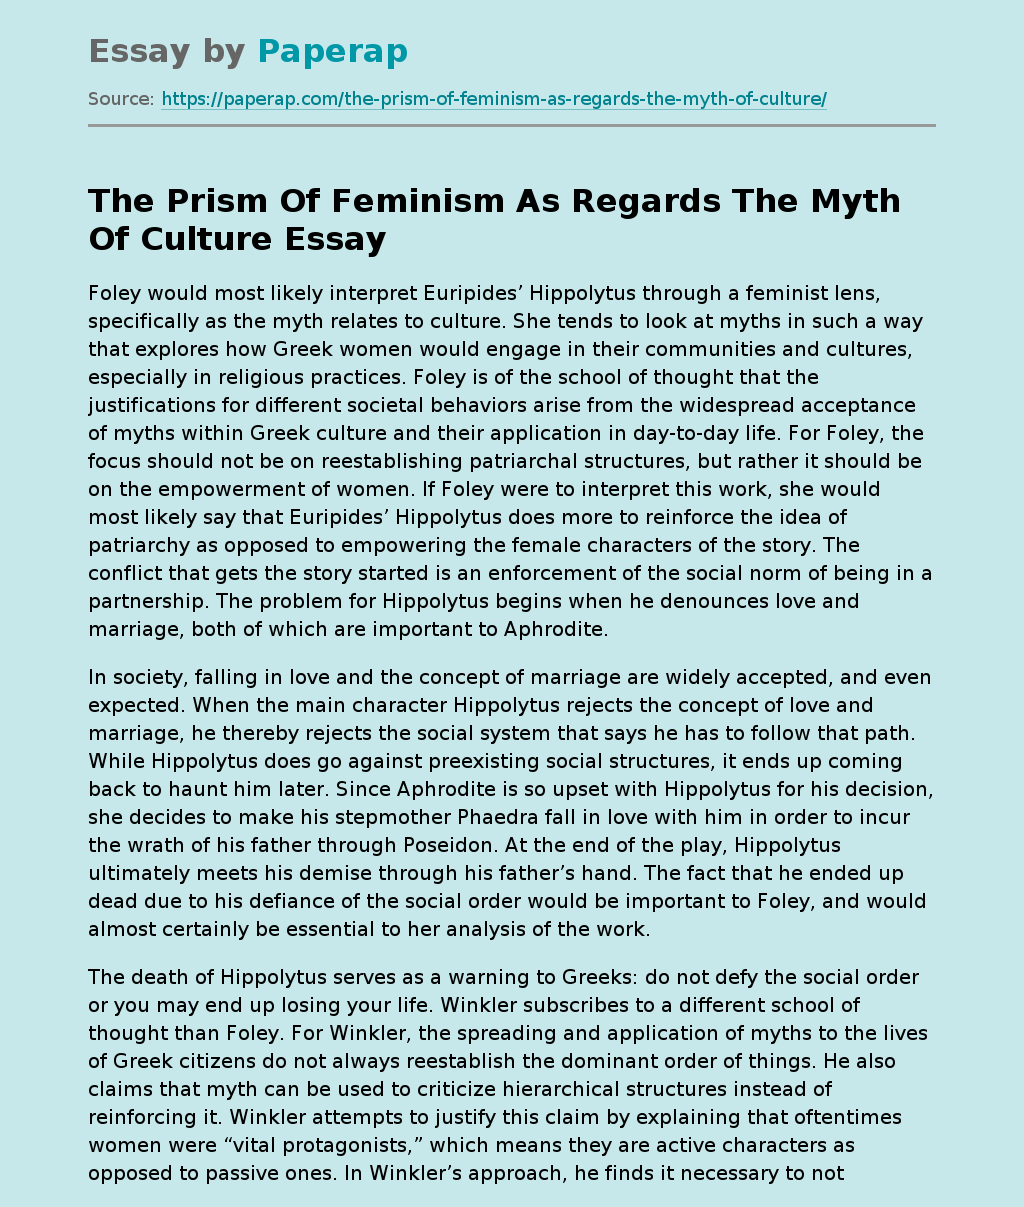 The Prism Of Feminism As Regards The Myth Of Culture